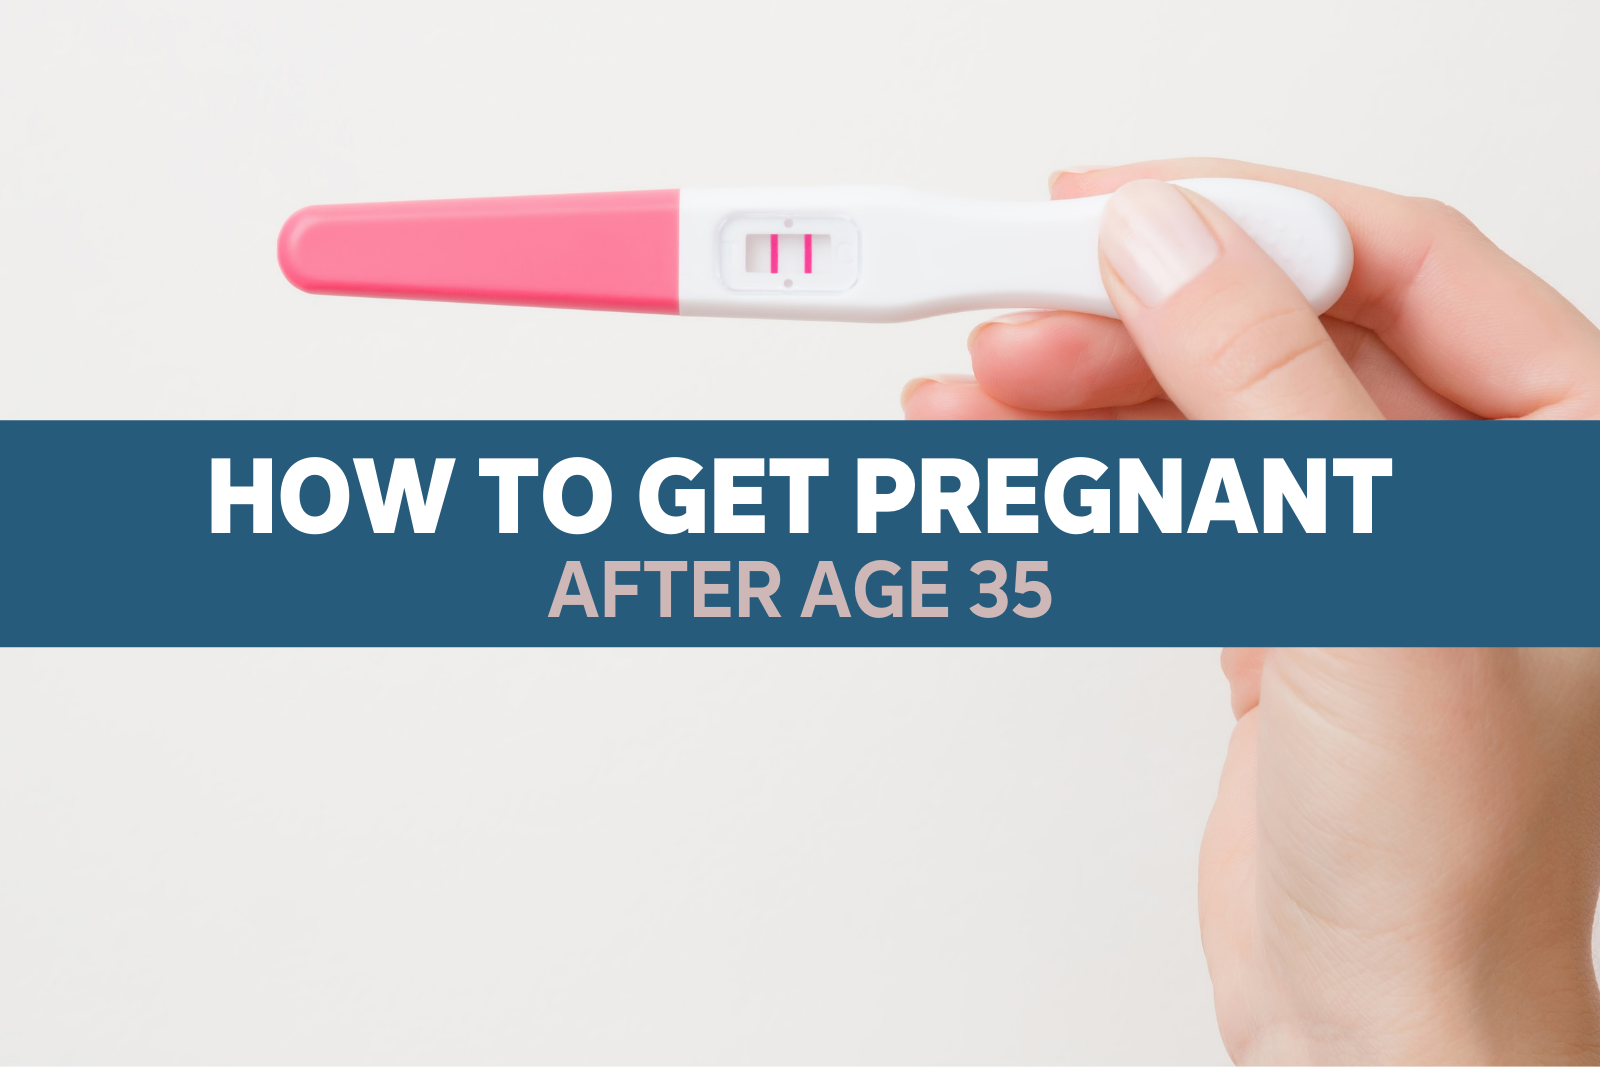 How to Get Pregnant After Age 35